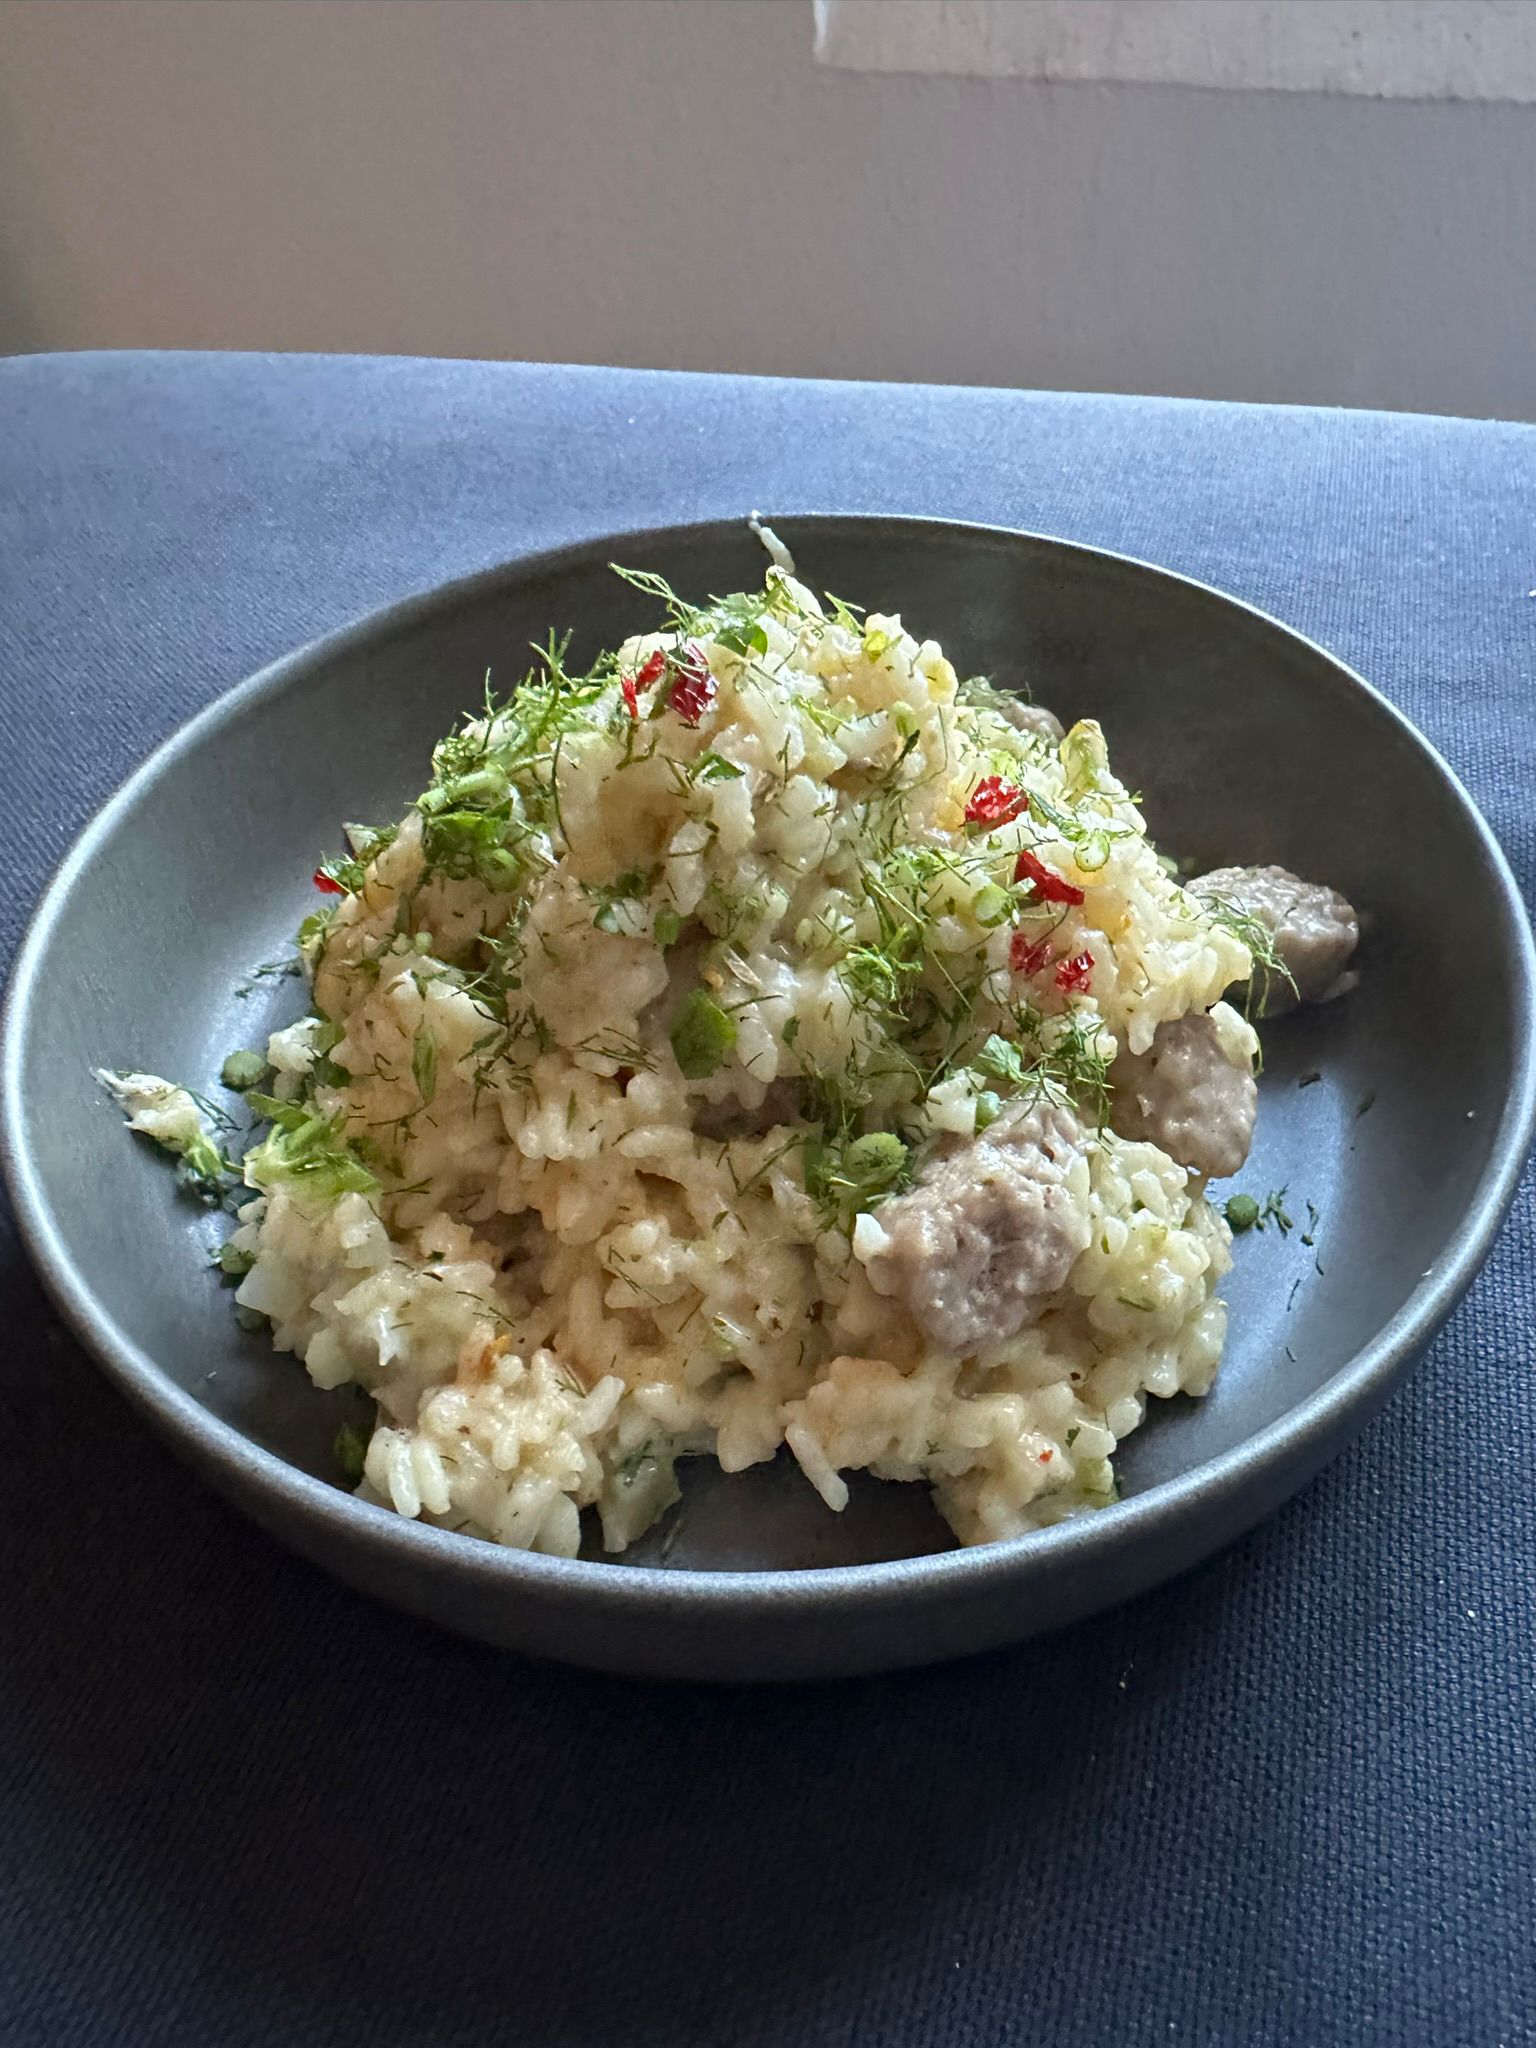 Spicy Fennel Risotto With Sausage